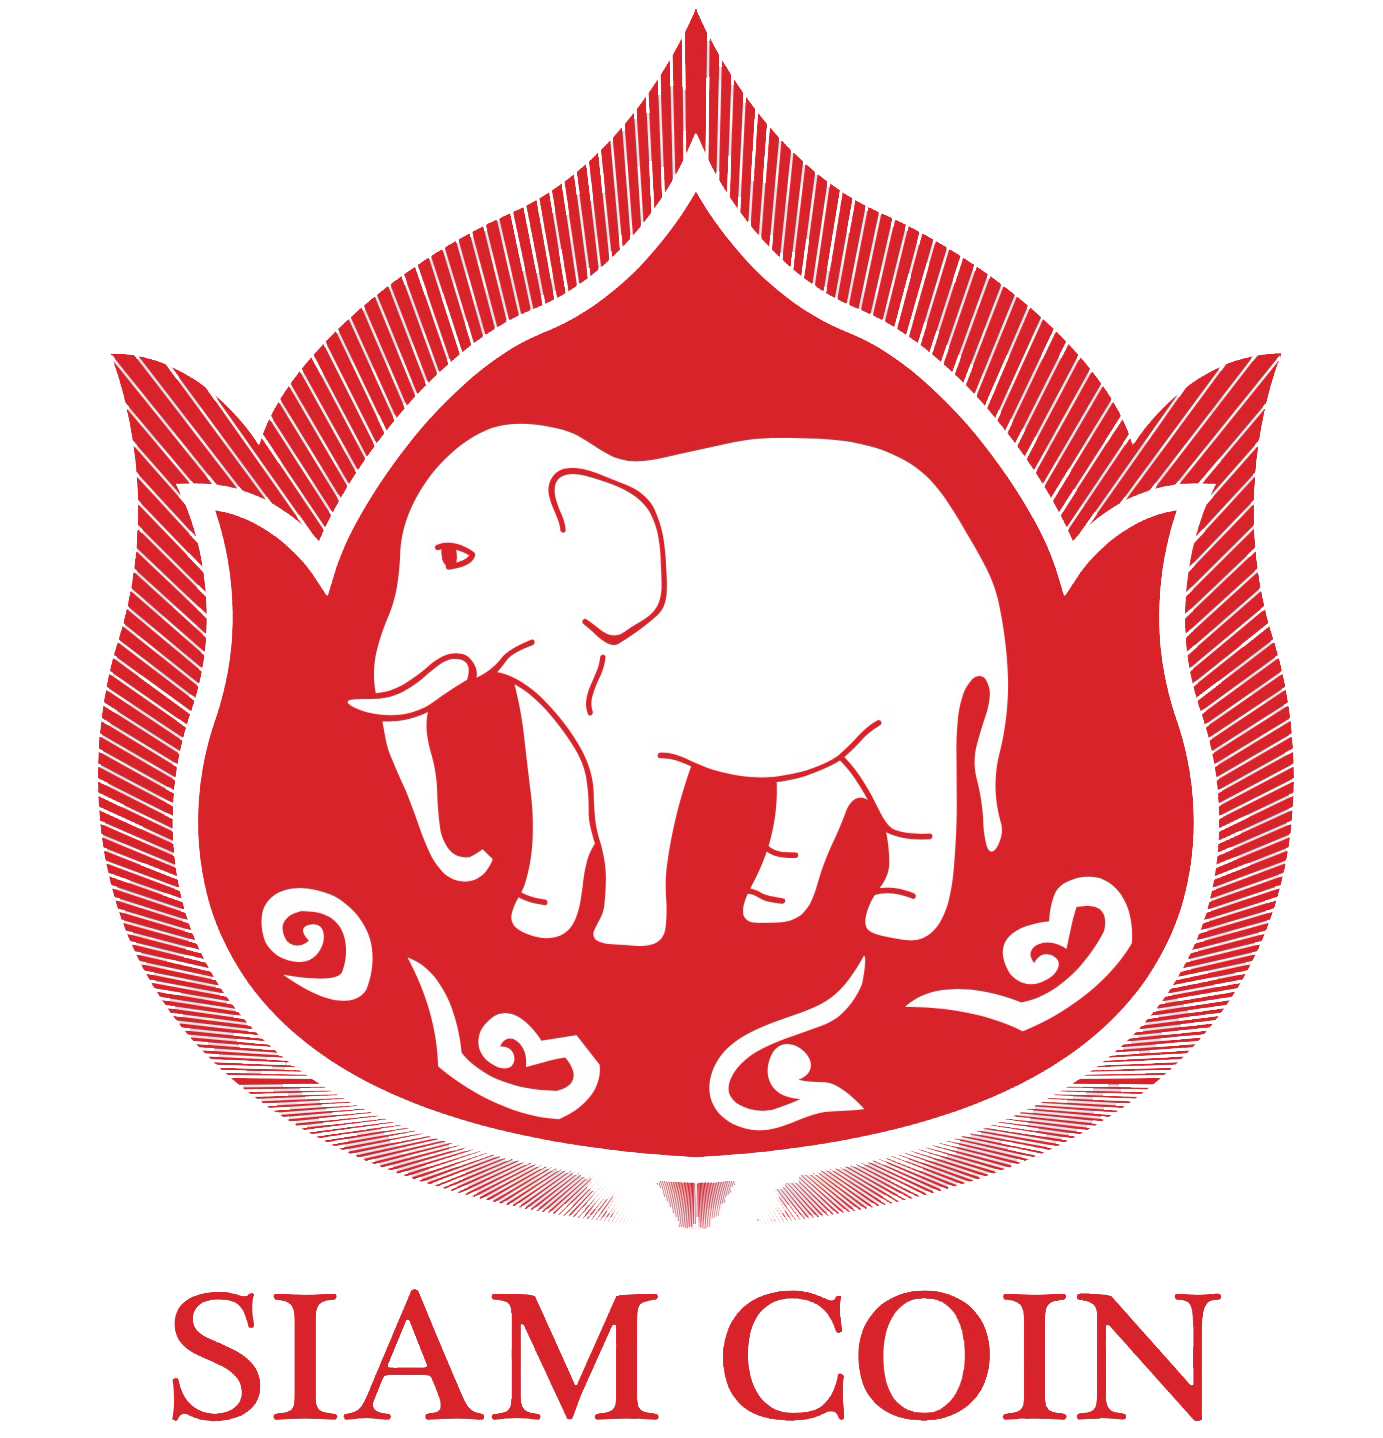 SIAMCOIN